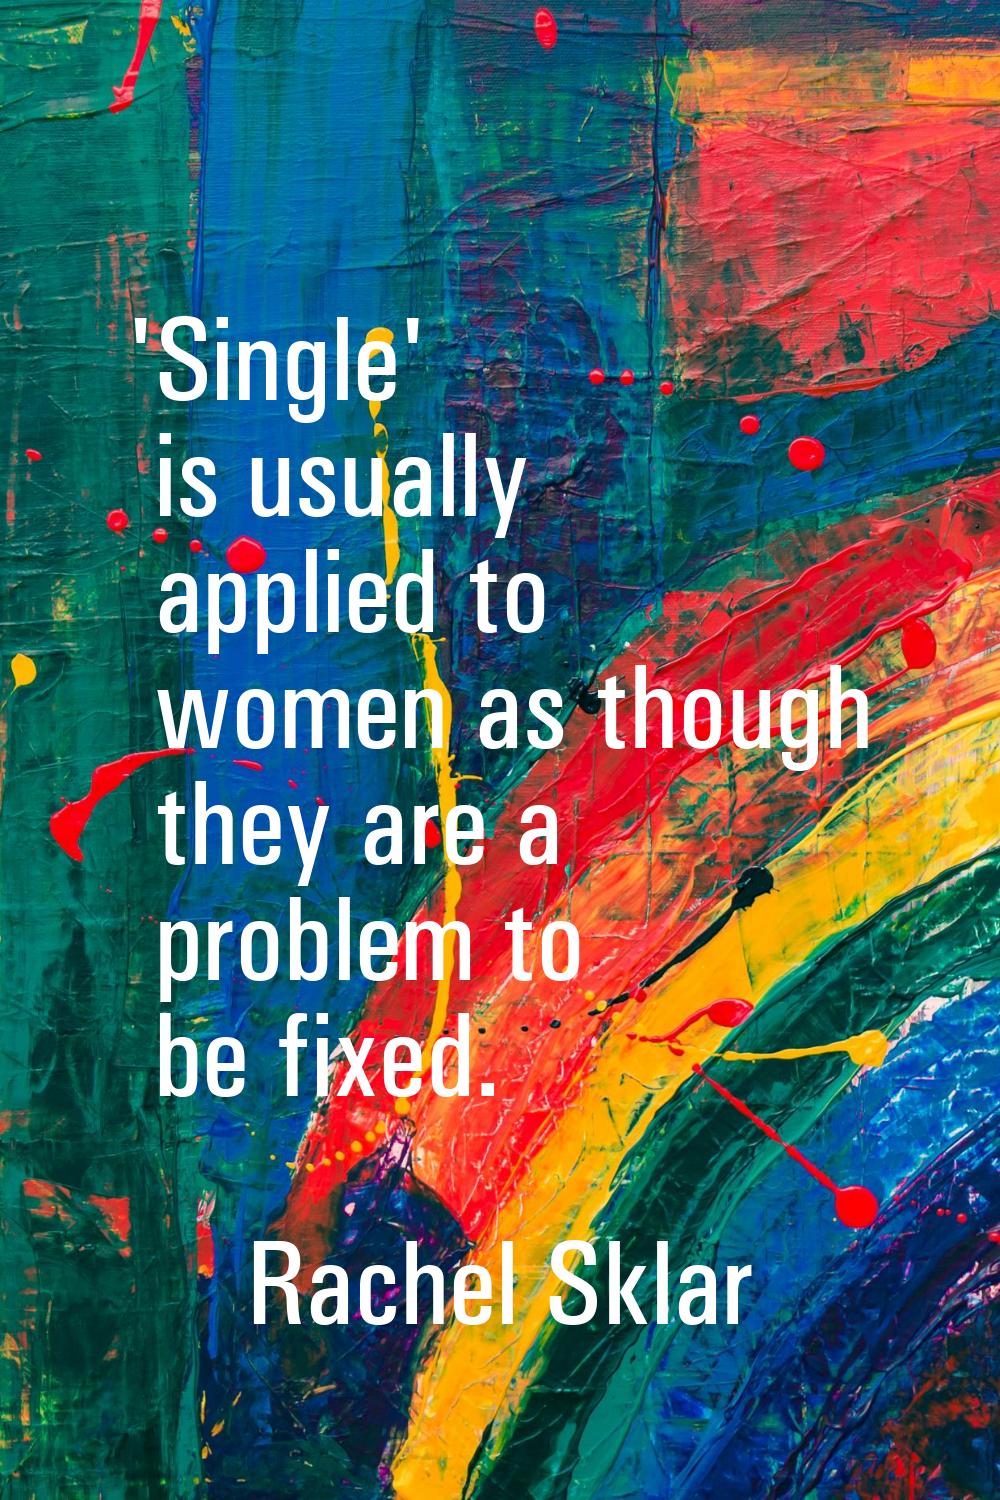 'Single' is usually applied to women as though they are a problem to be fixed.